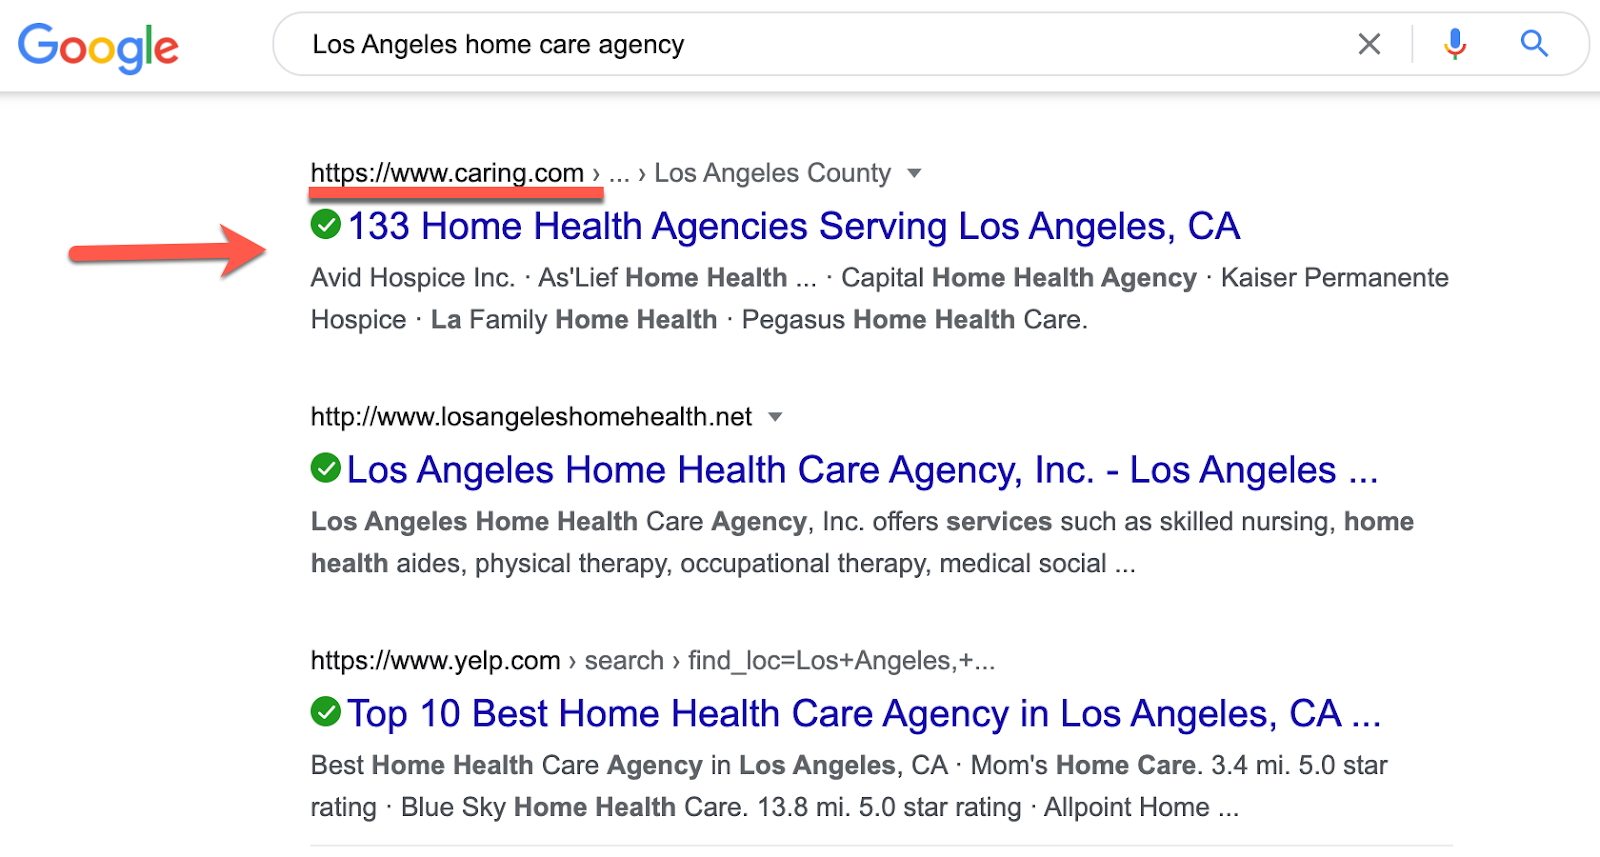 Los Angeles home care agency